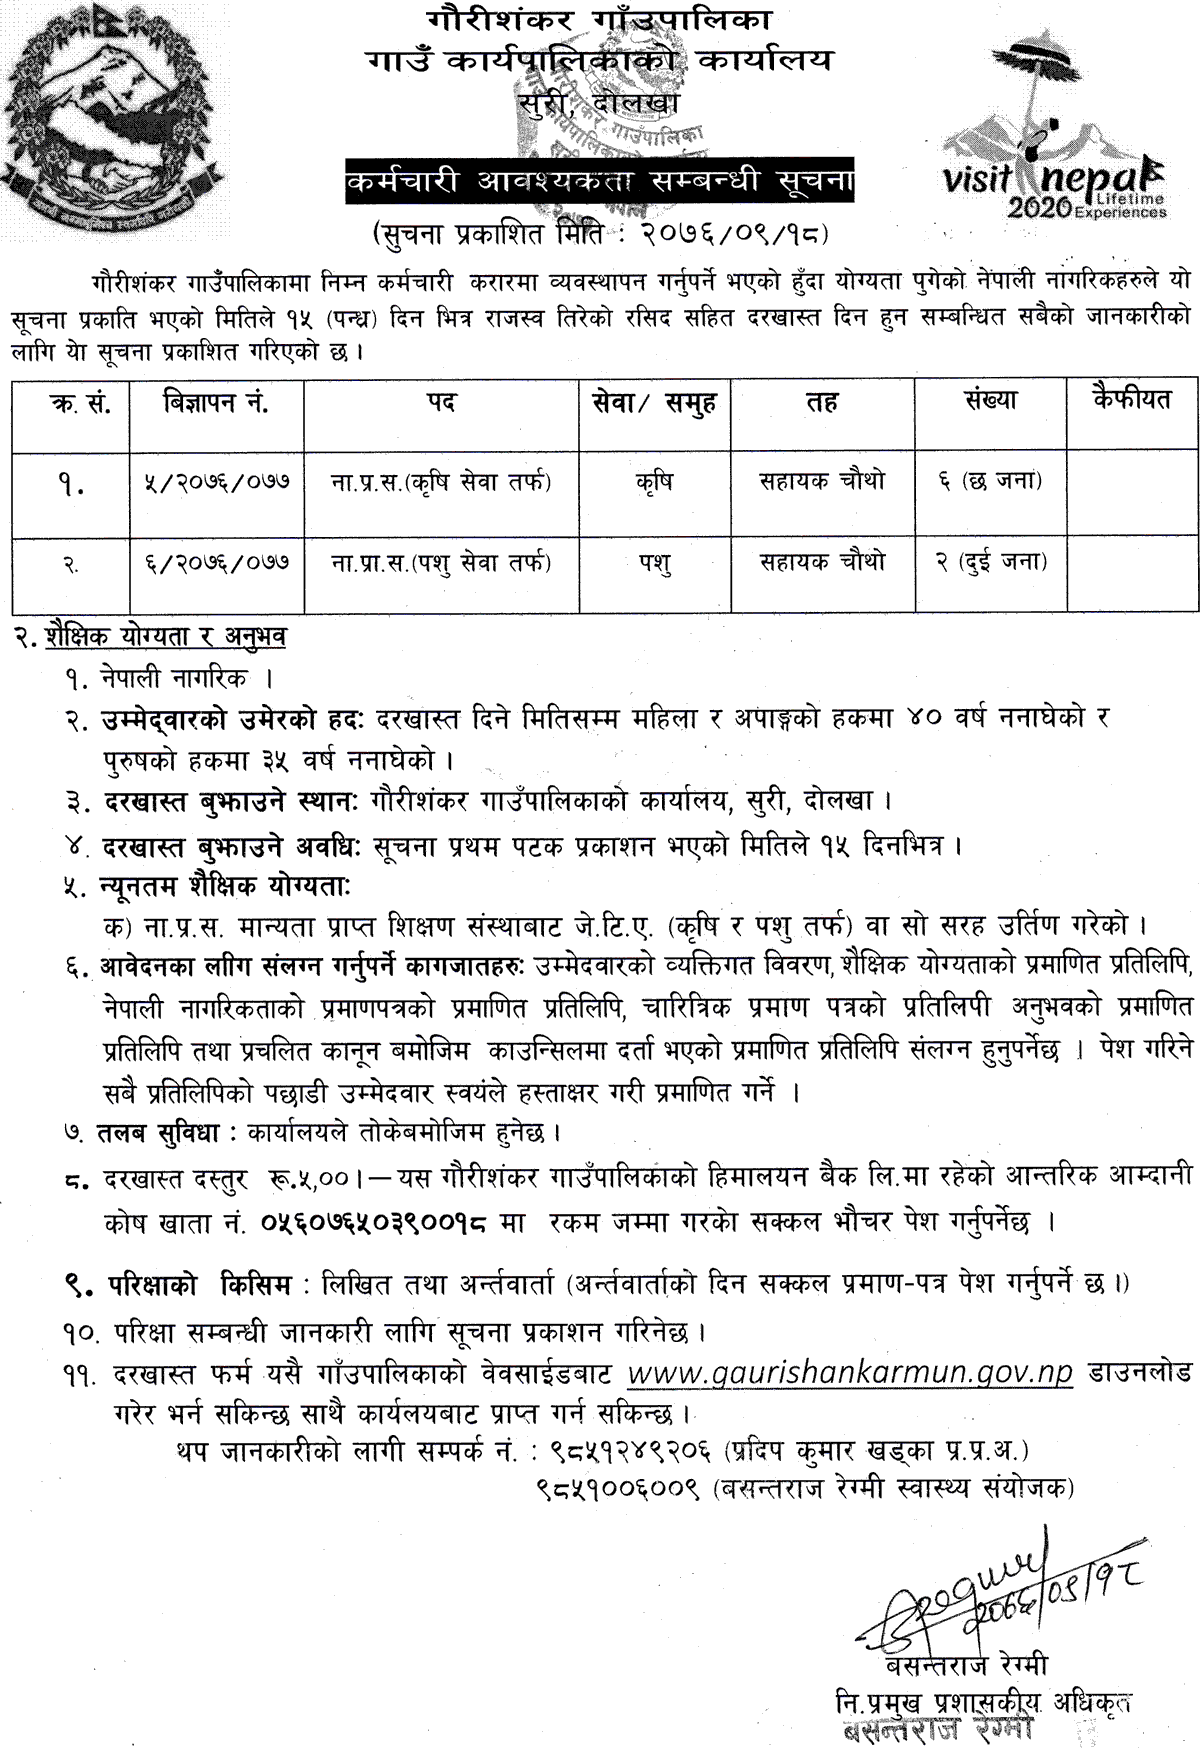 Gaurishankar Rural Municipality Job Vacancy for Agriculture and Animal Services